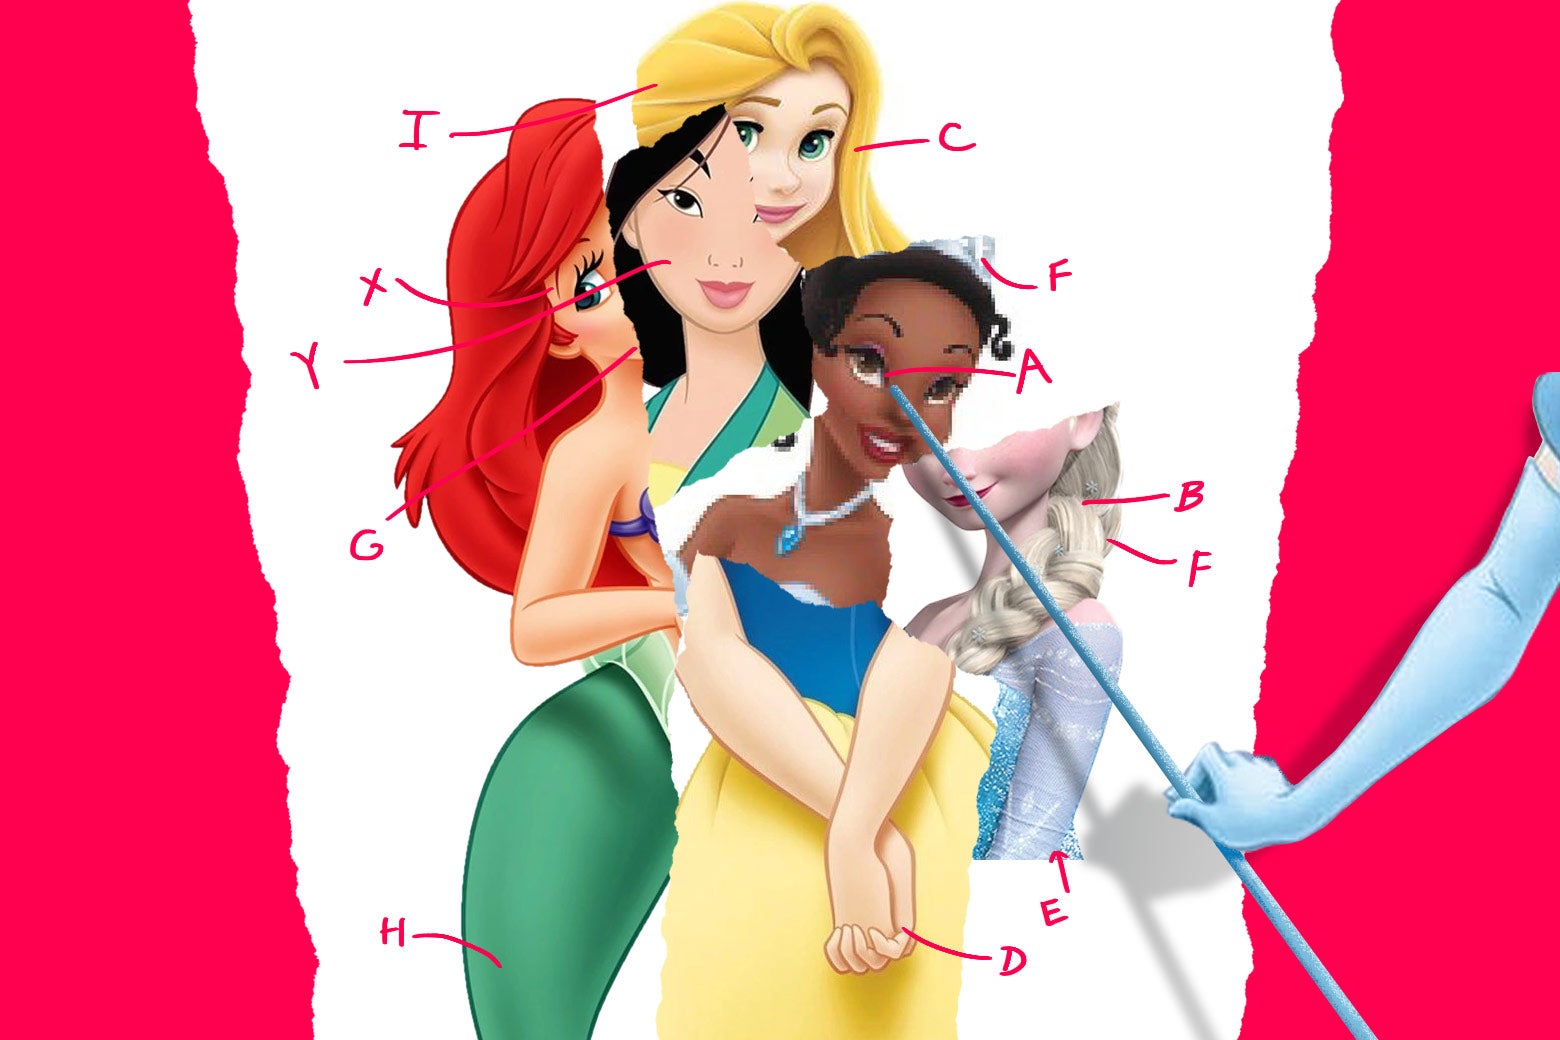 Why are we so obsessed with Disney princesses? image